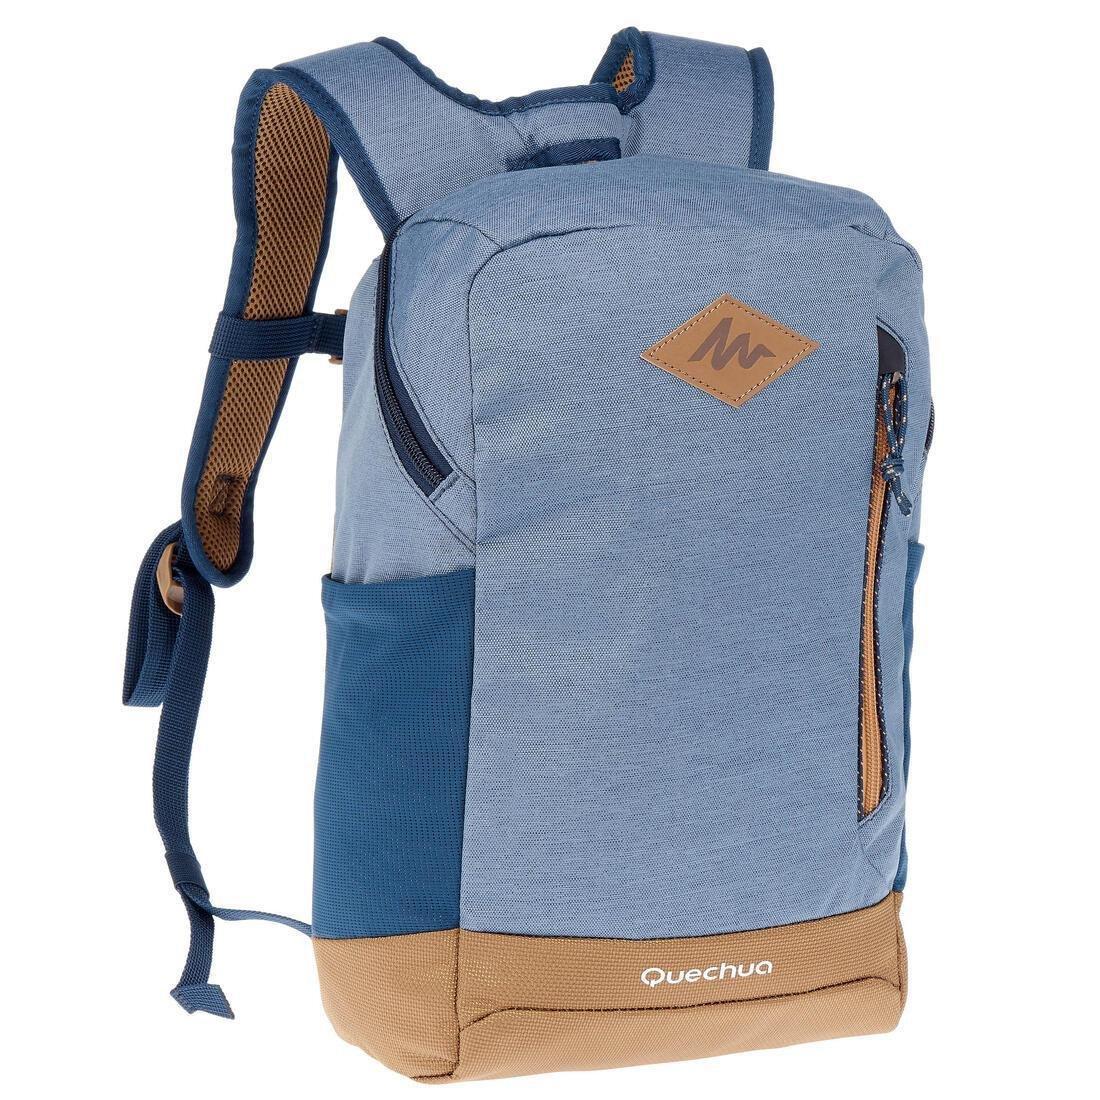 QUECHUA - Country Walking Backpack, Blue Grey